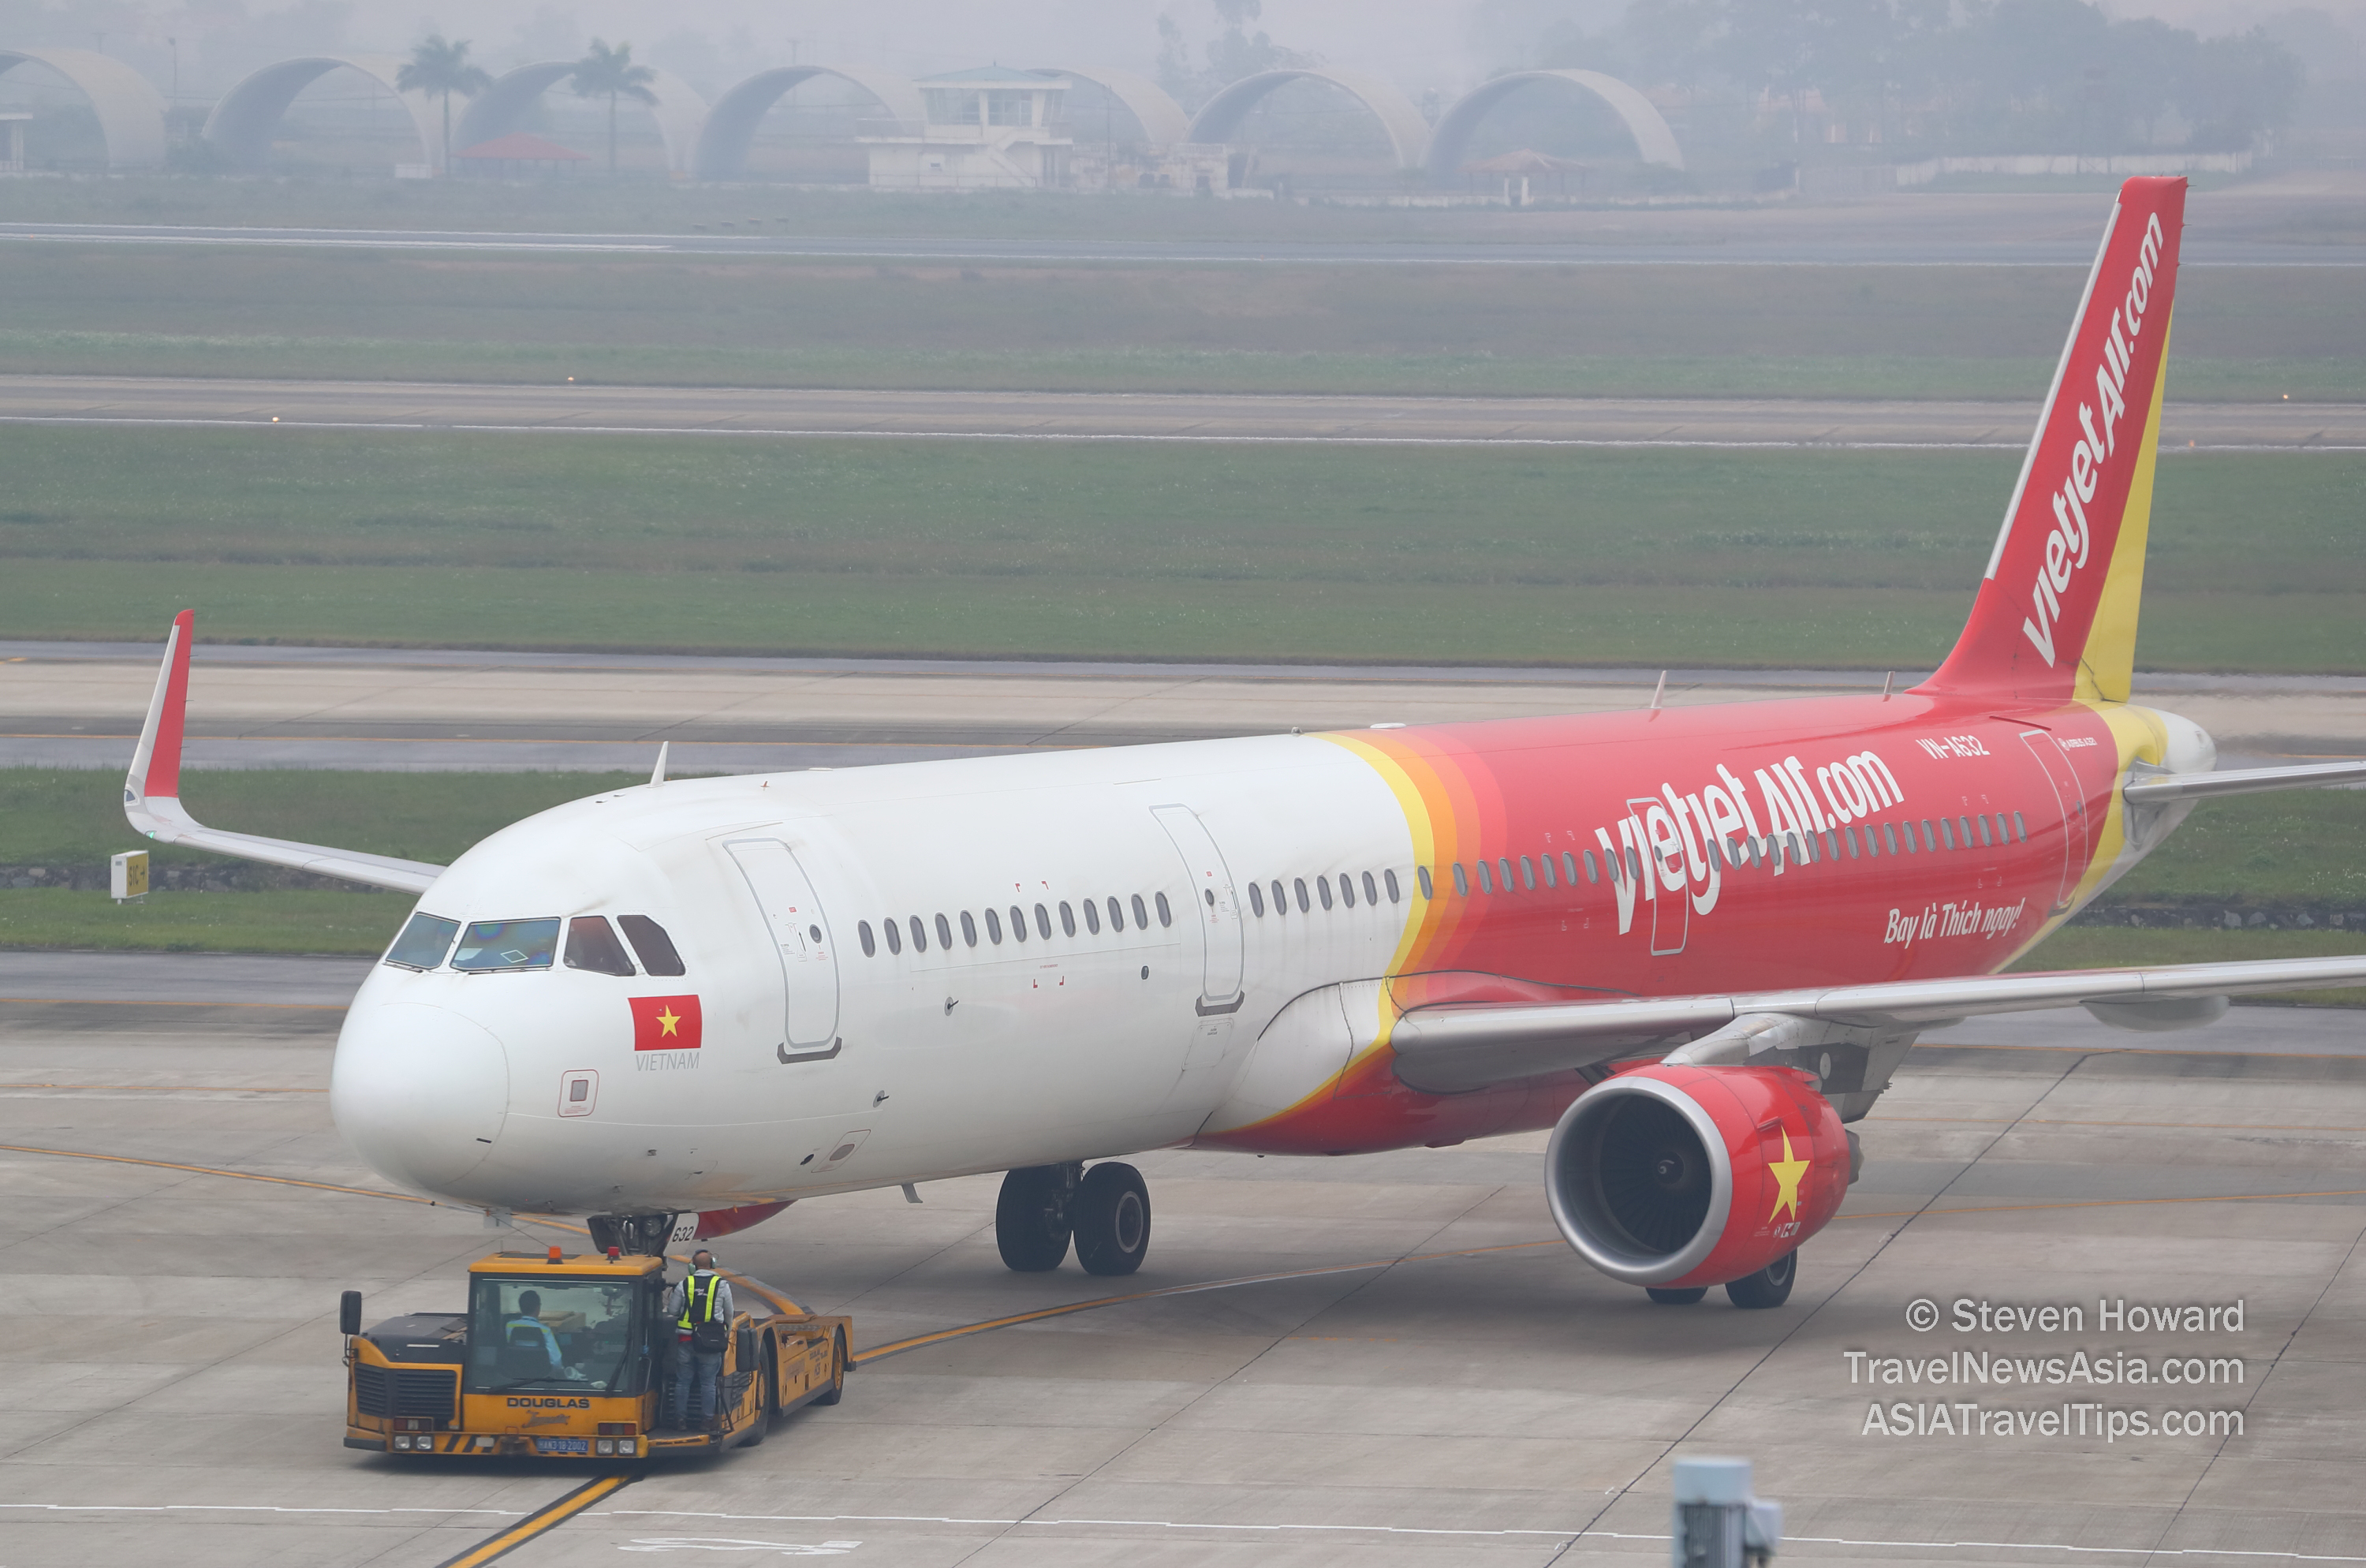 Vietjet Airbus A321 reg: VNA632. Picture taken by Steven Howard of TravelNewsAsia.com Click to enlarge.